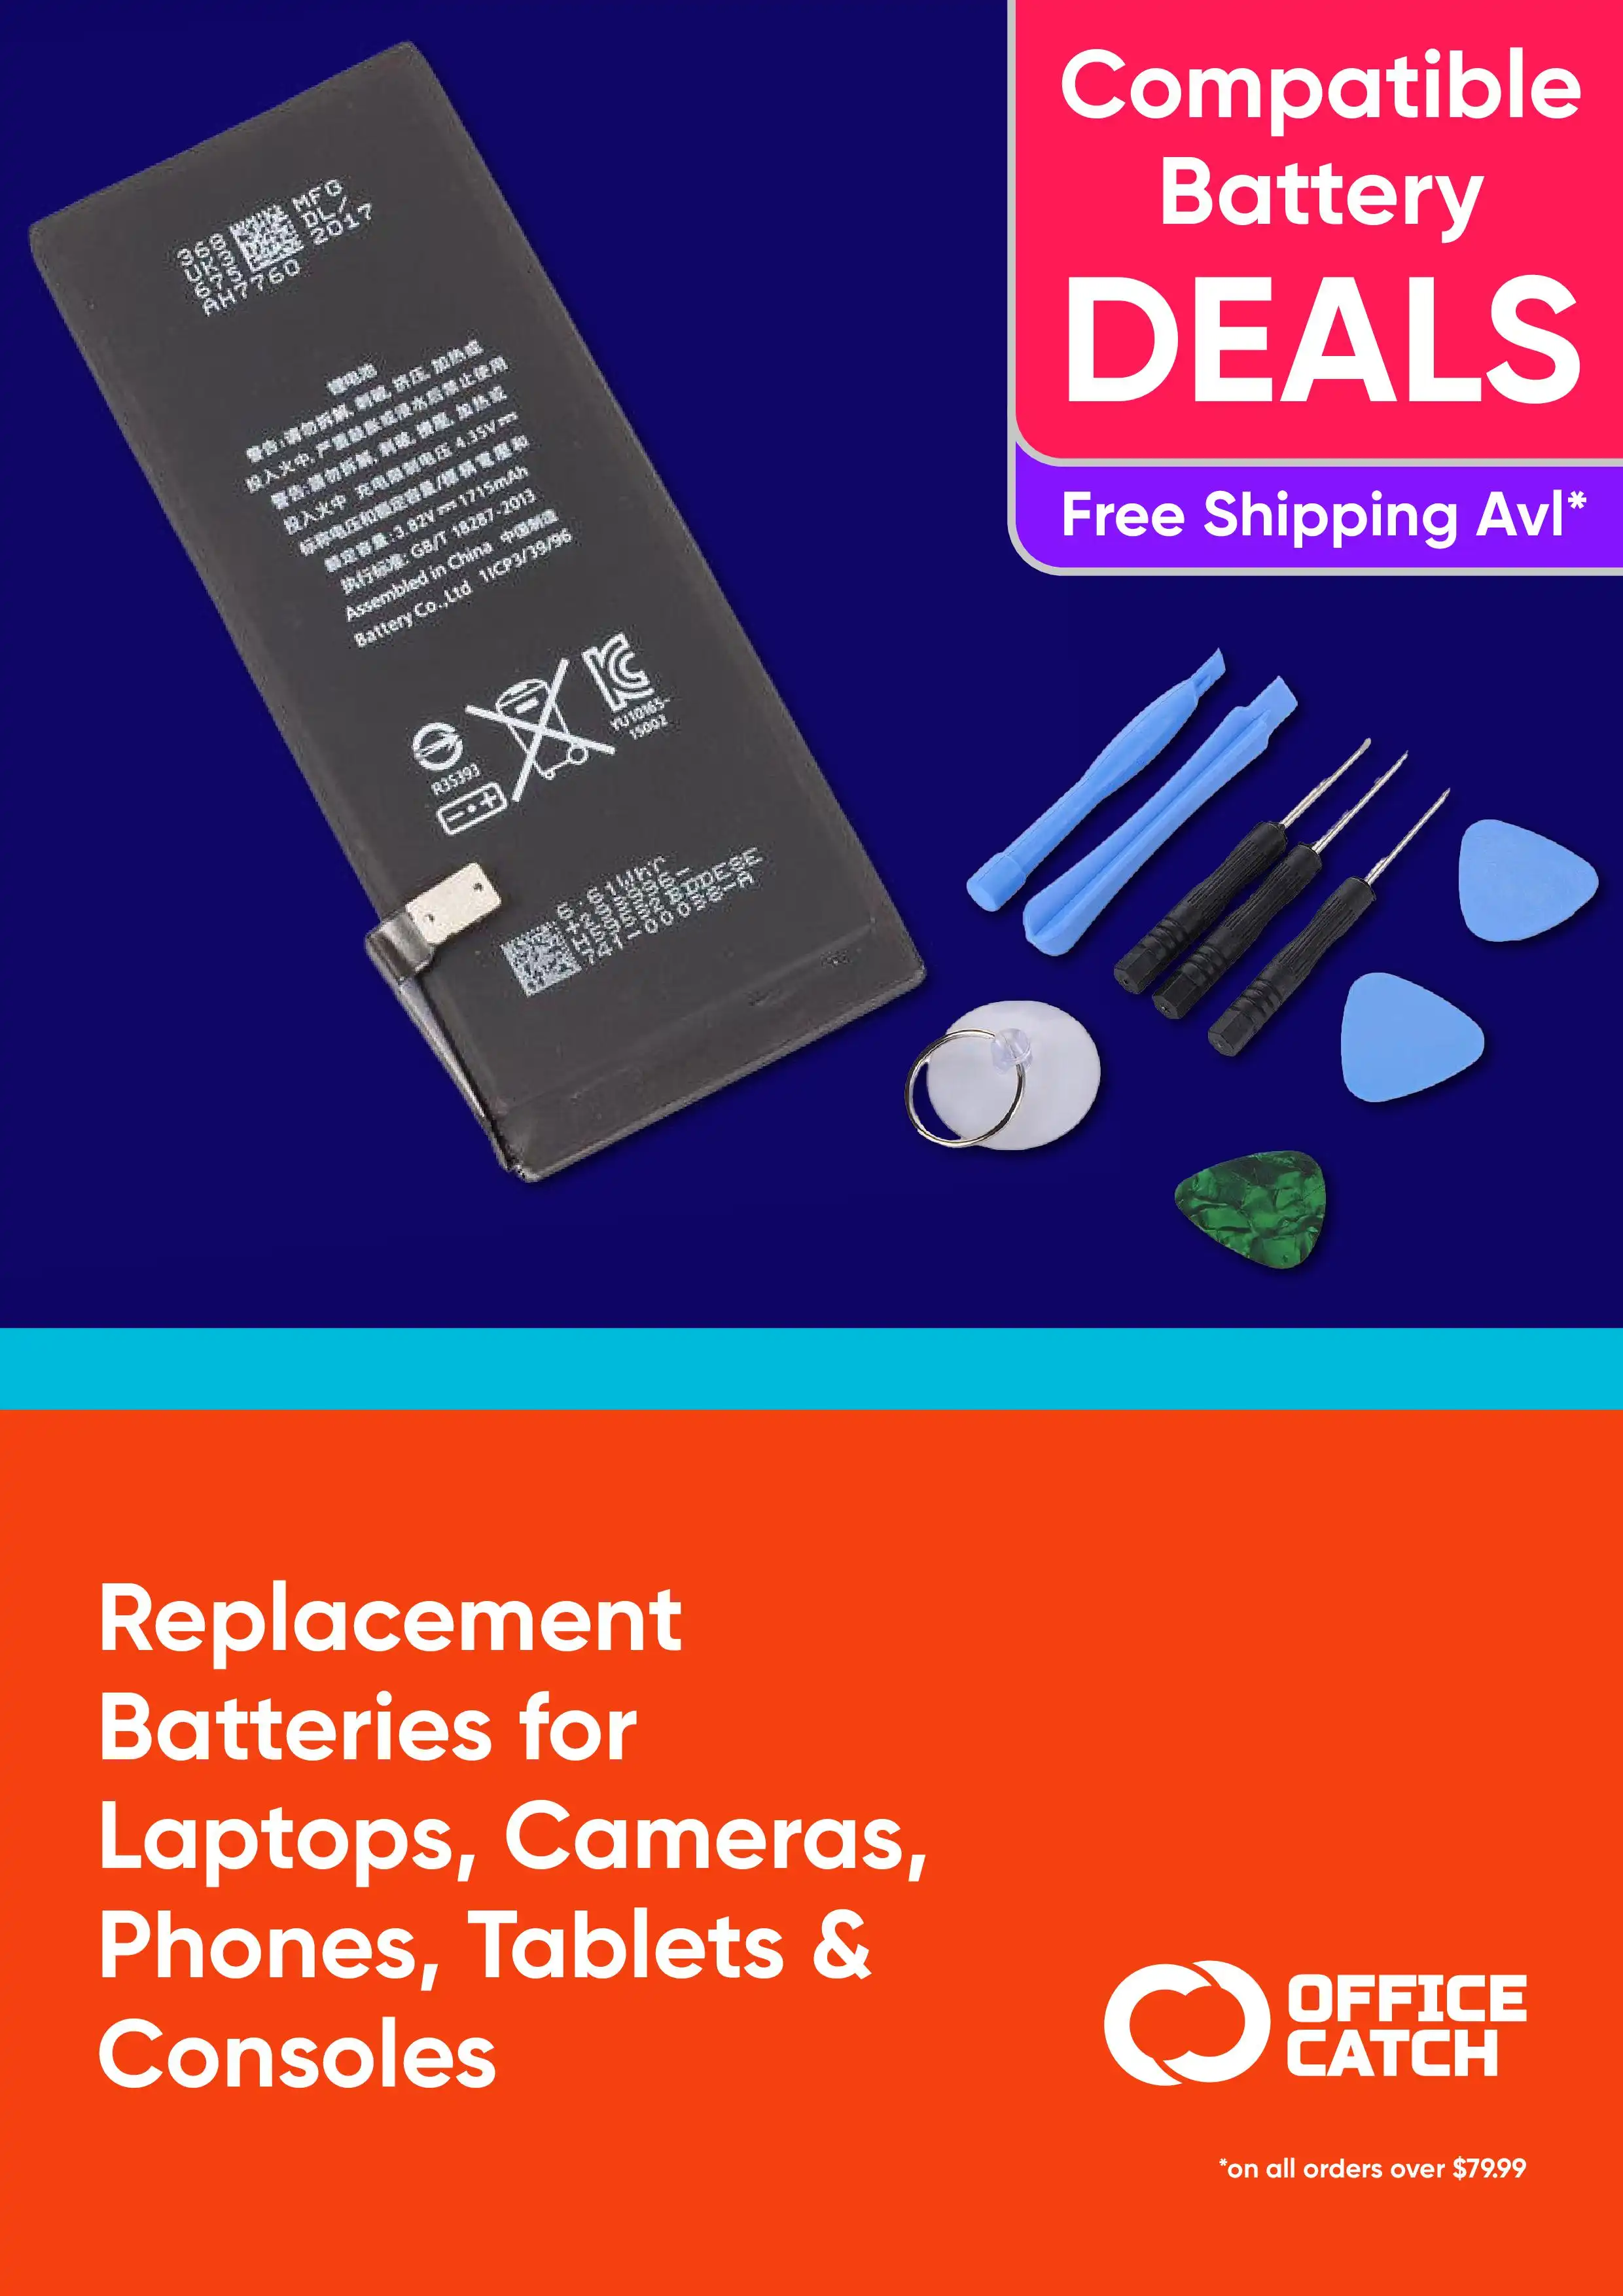 Replacement Batteries for Laptops, Cameras, Phones, Tablets & Consoles